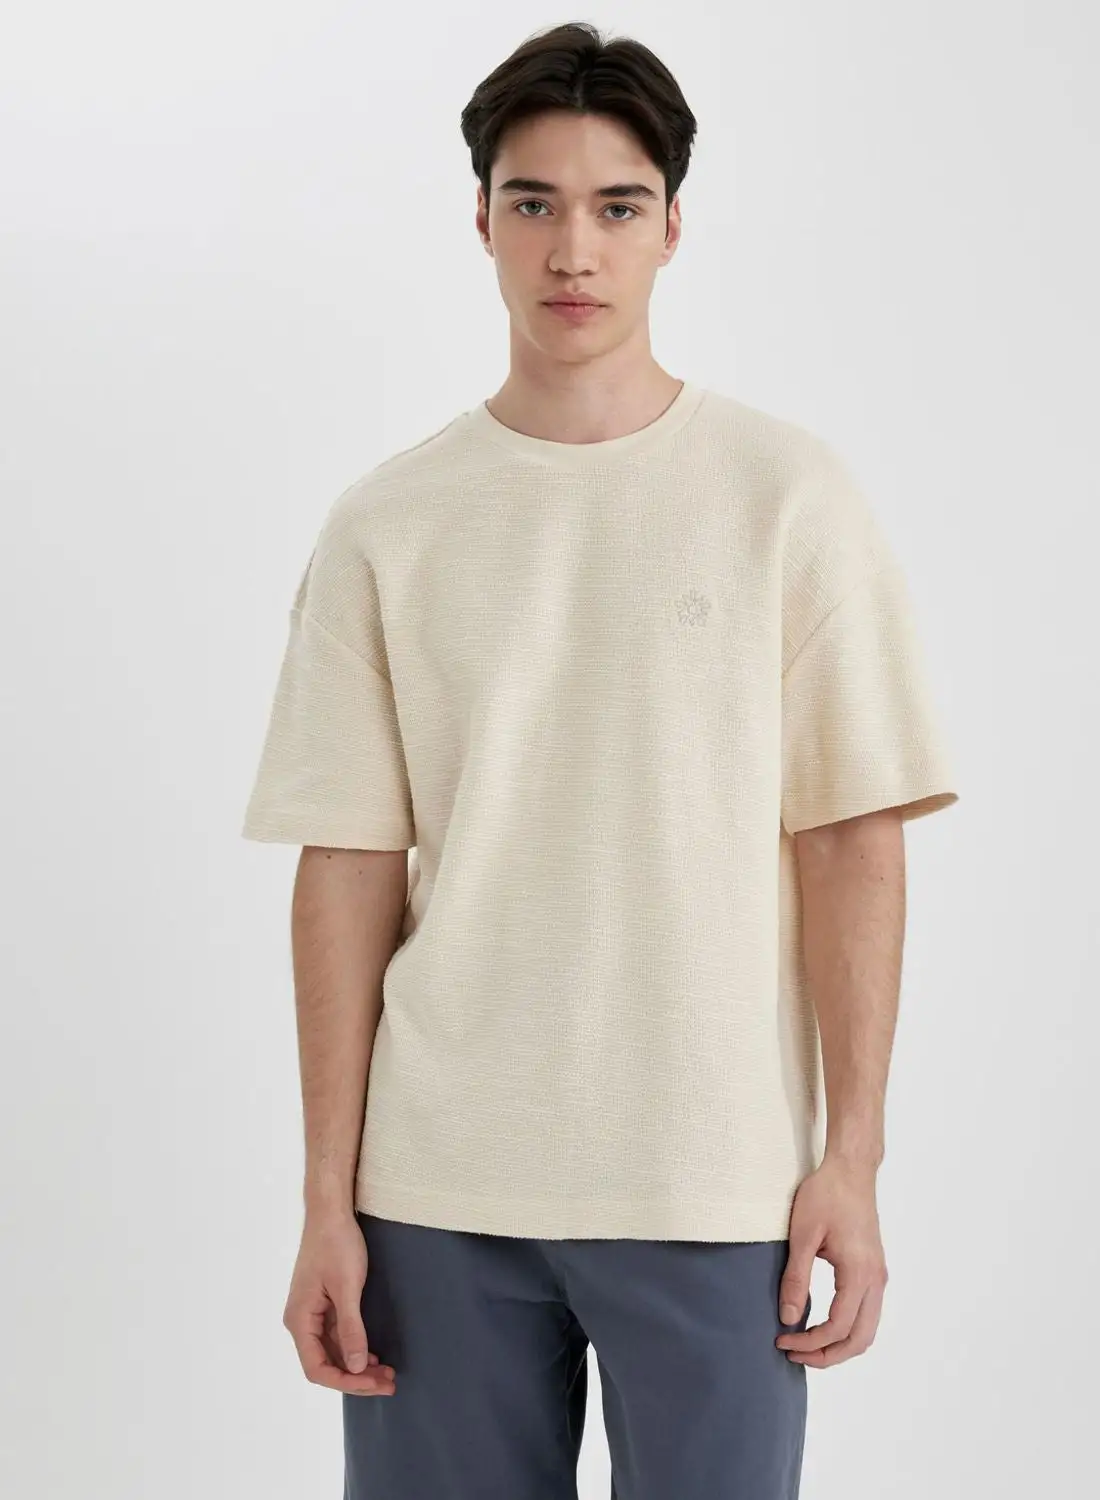 DeFacto Comfort Fit Crew Neck Printed Knitwear T-Shirt